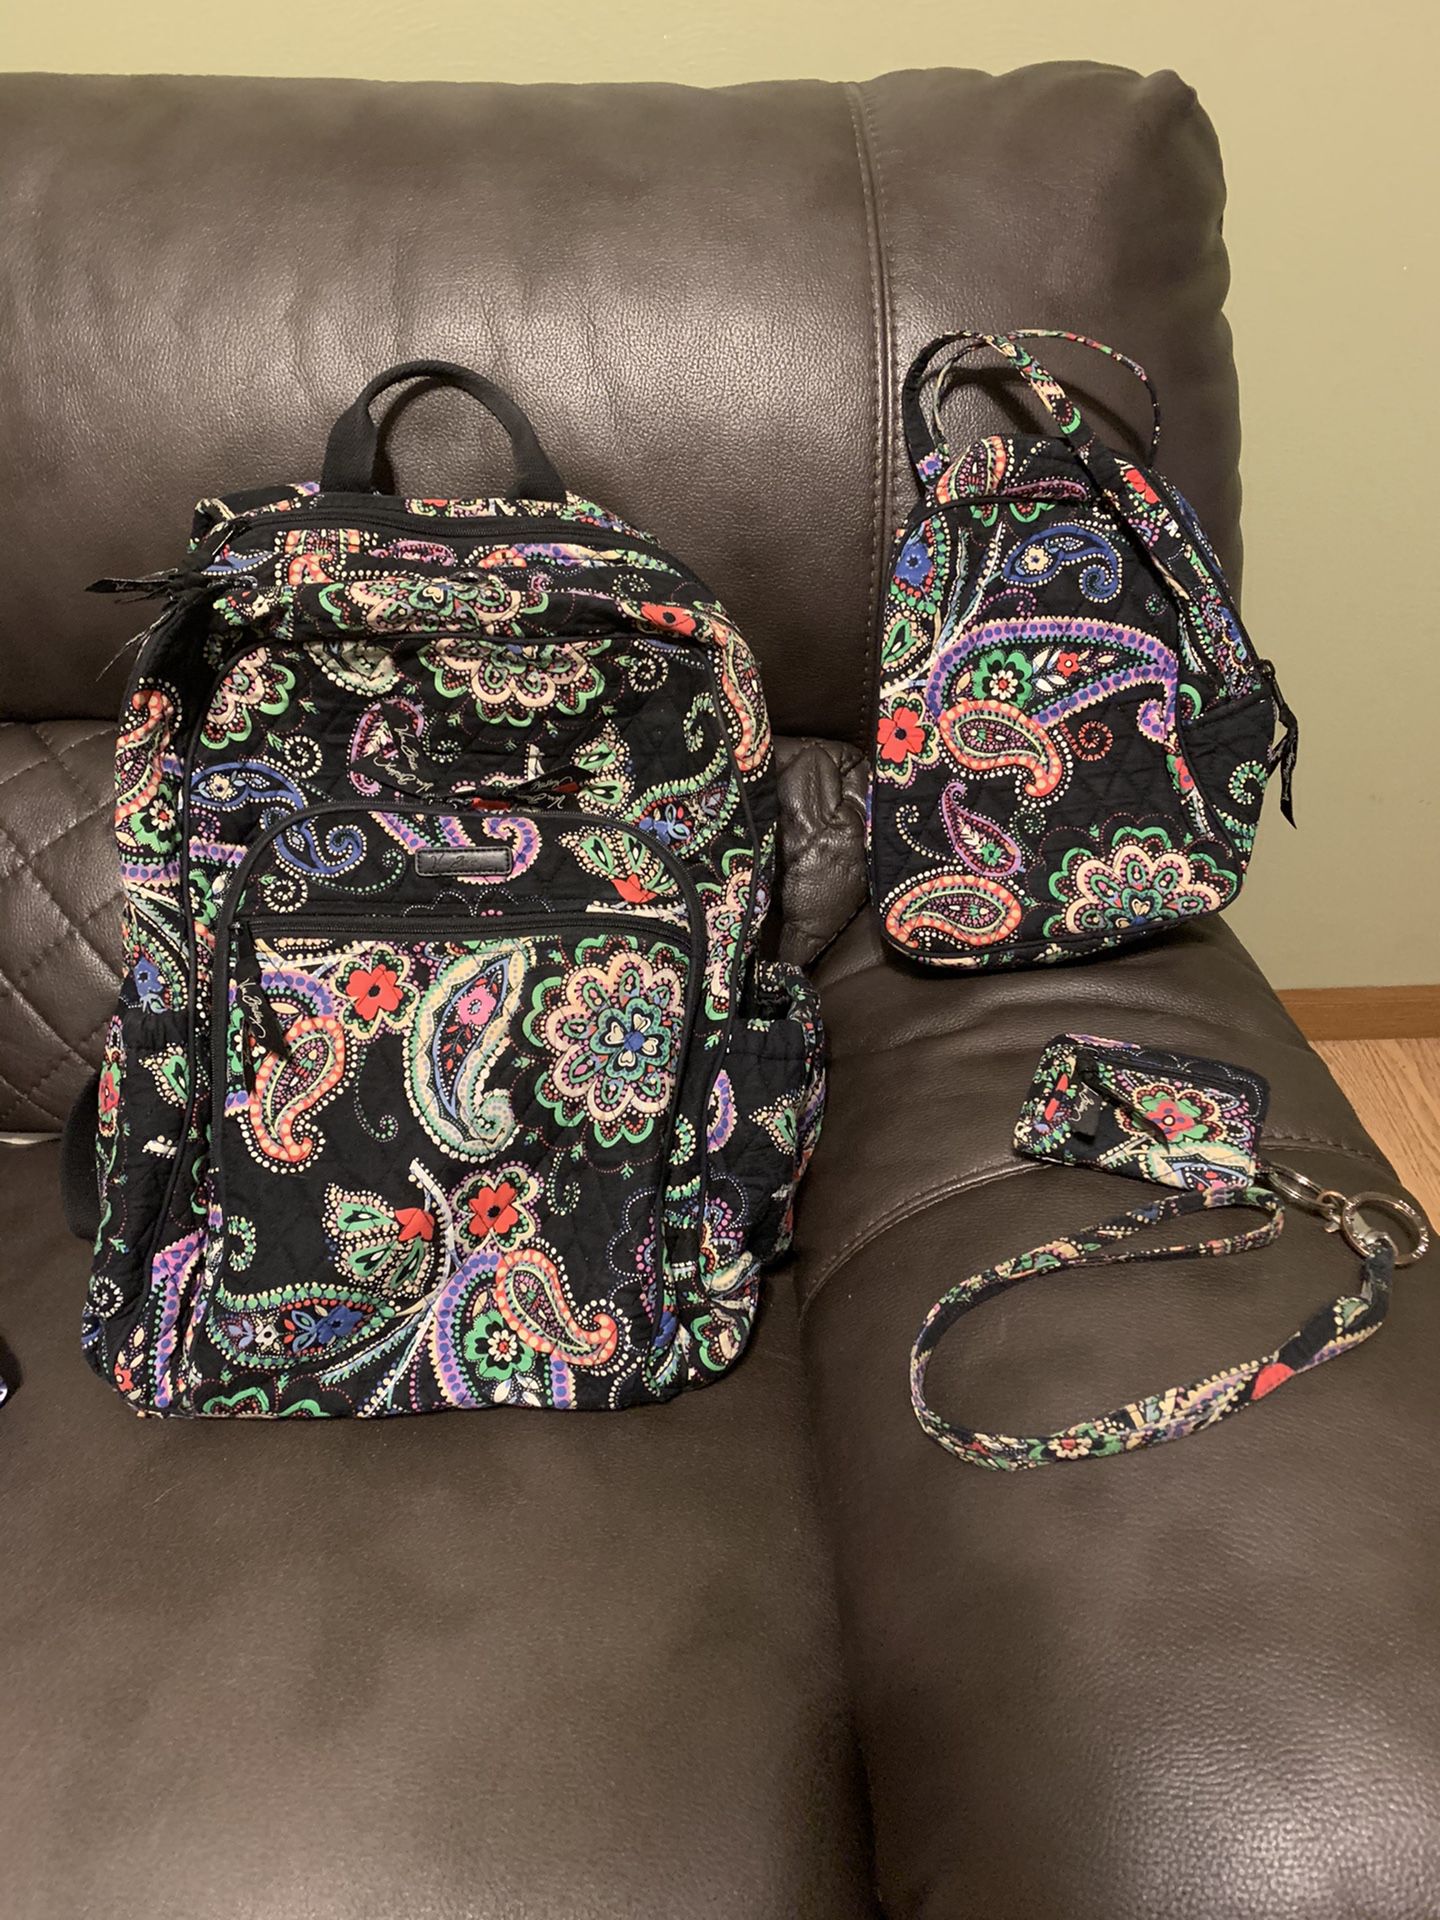 Vera Bradley backpack, lunch box, and lanyard/ wallet!